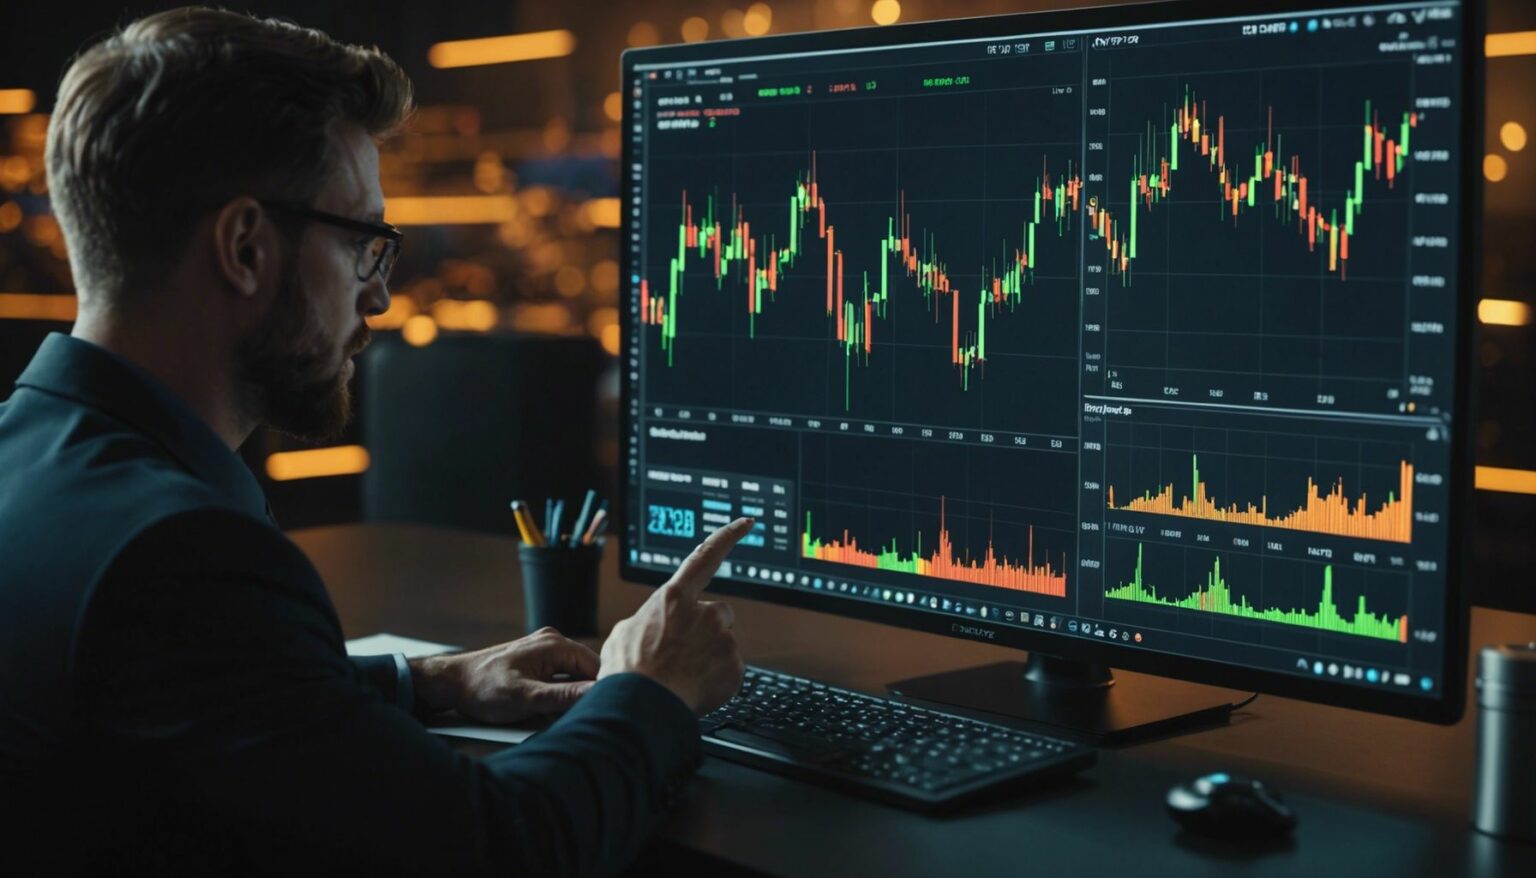 A trader analyzing a rising candlestick chart with cryptocurrency symbols on a digital screen.